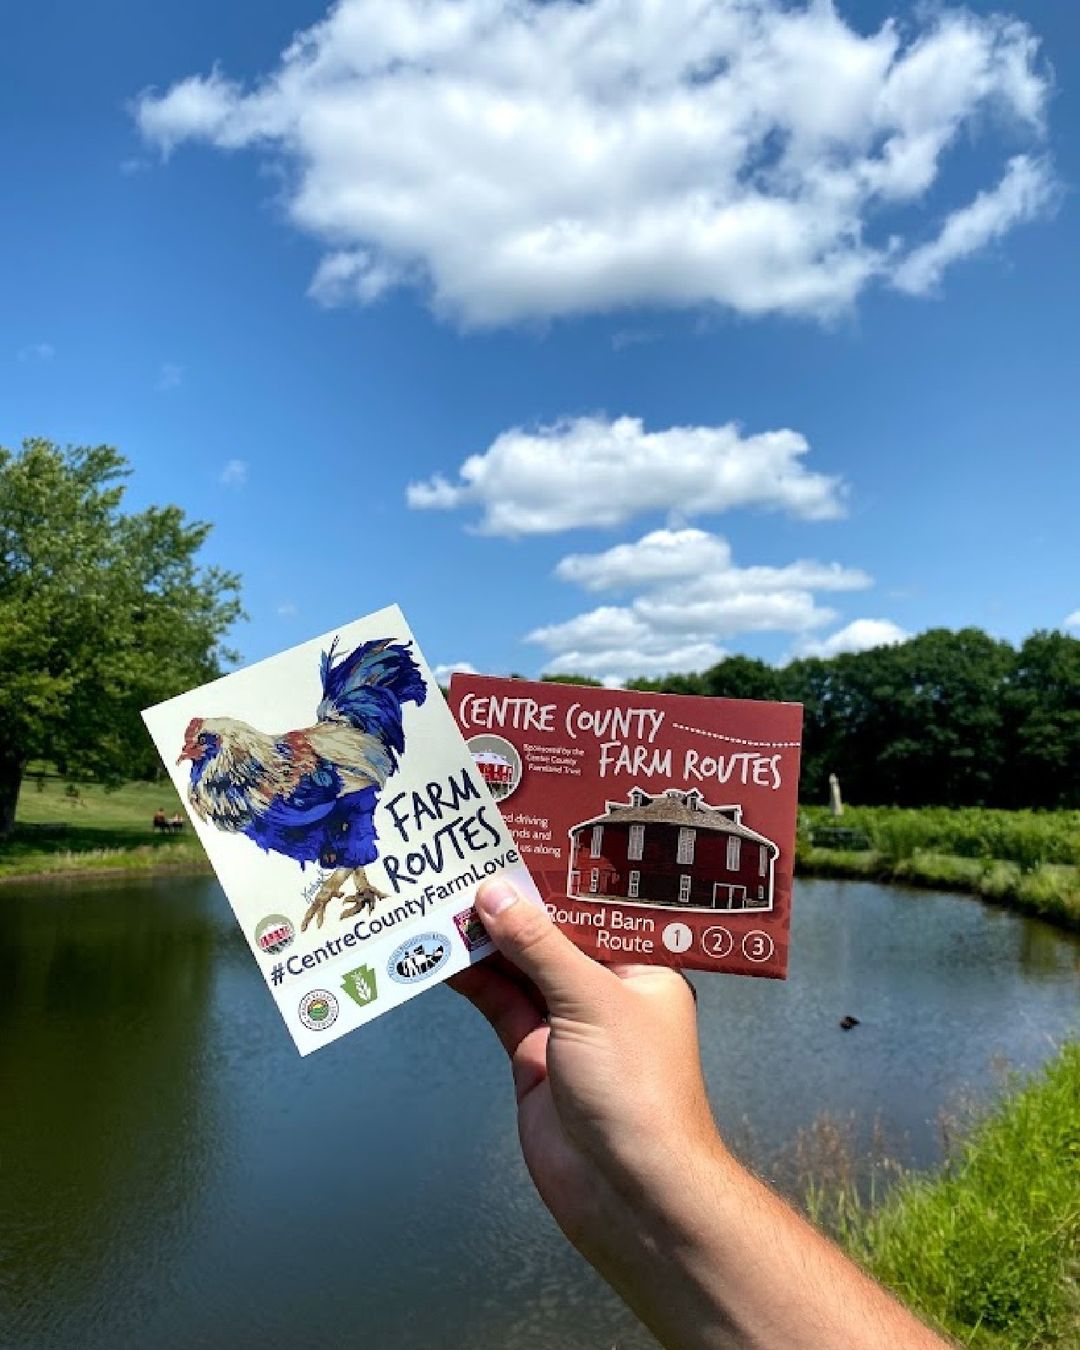 Sponsored by the @centrecountyfarmlandtrust, Centre County Farm Routes celebrates our farmers, farmland preservation, and vibrant local food system.
Farm Route No. 1 is here and the Red Barn Route is up first. So get out the map and hit the road 